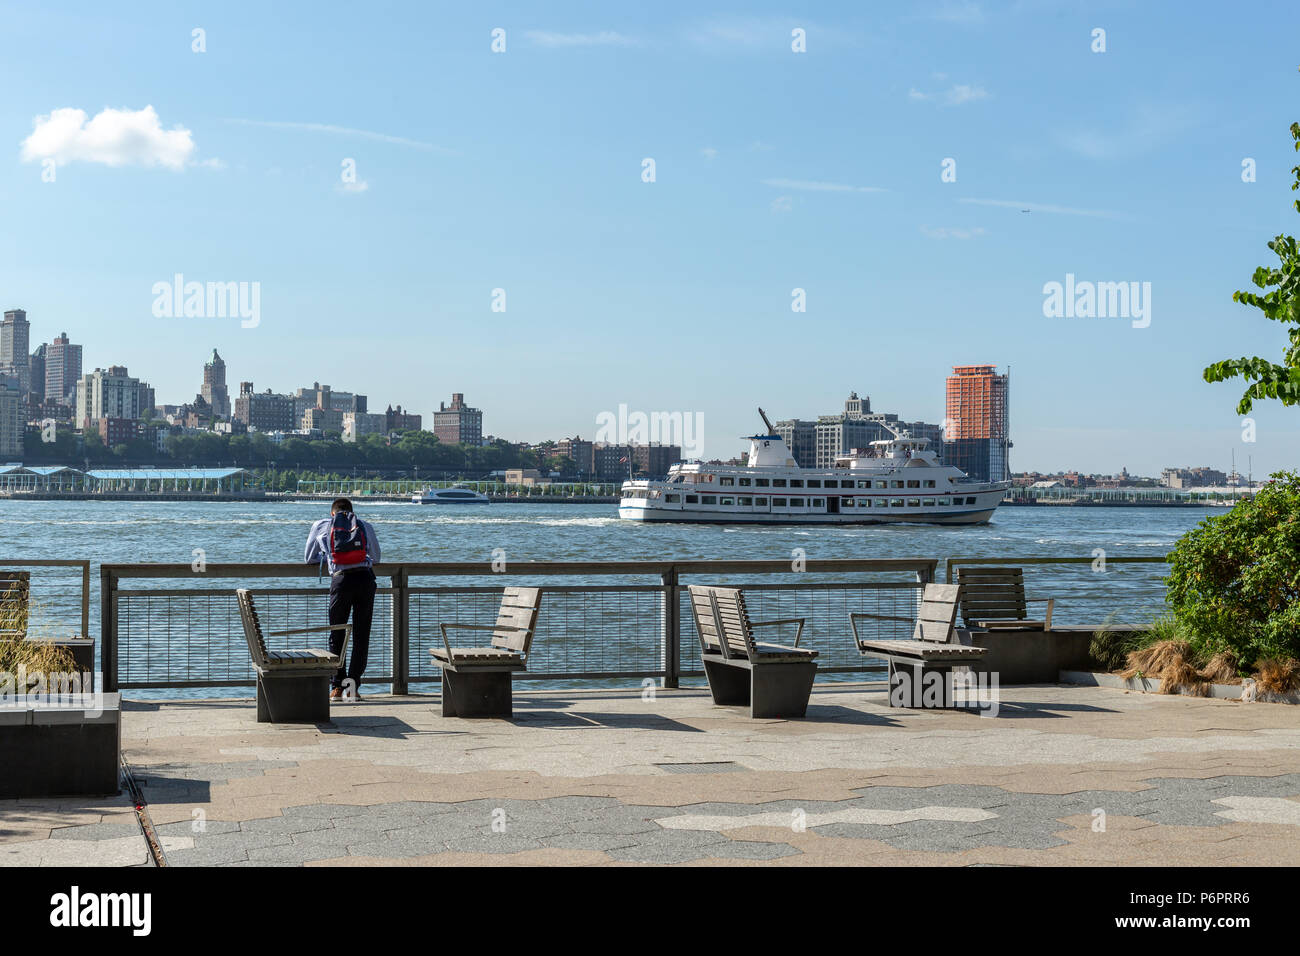 New York City / USA - JUN 25 2018: A man standing on Pier 15 at early morning Stock Photo